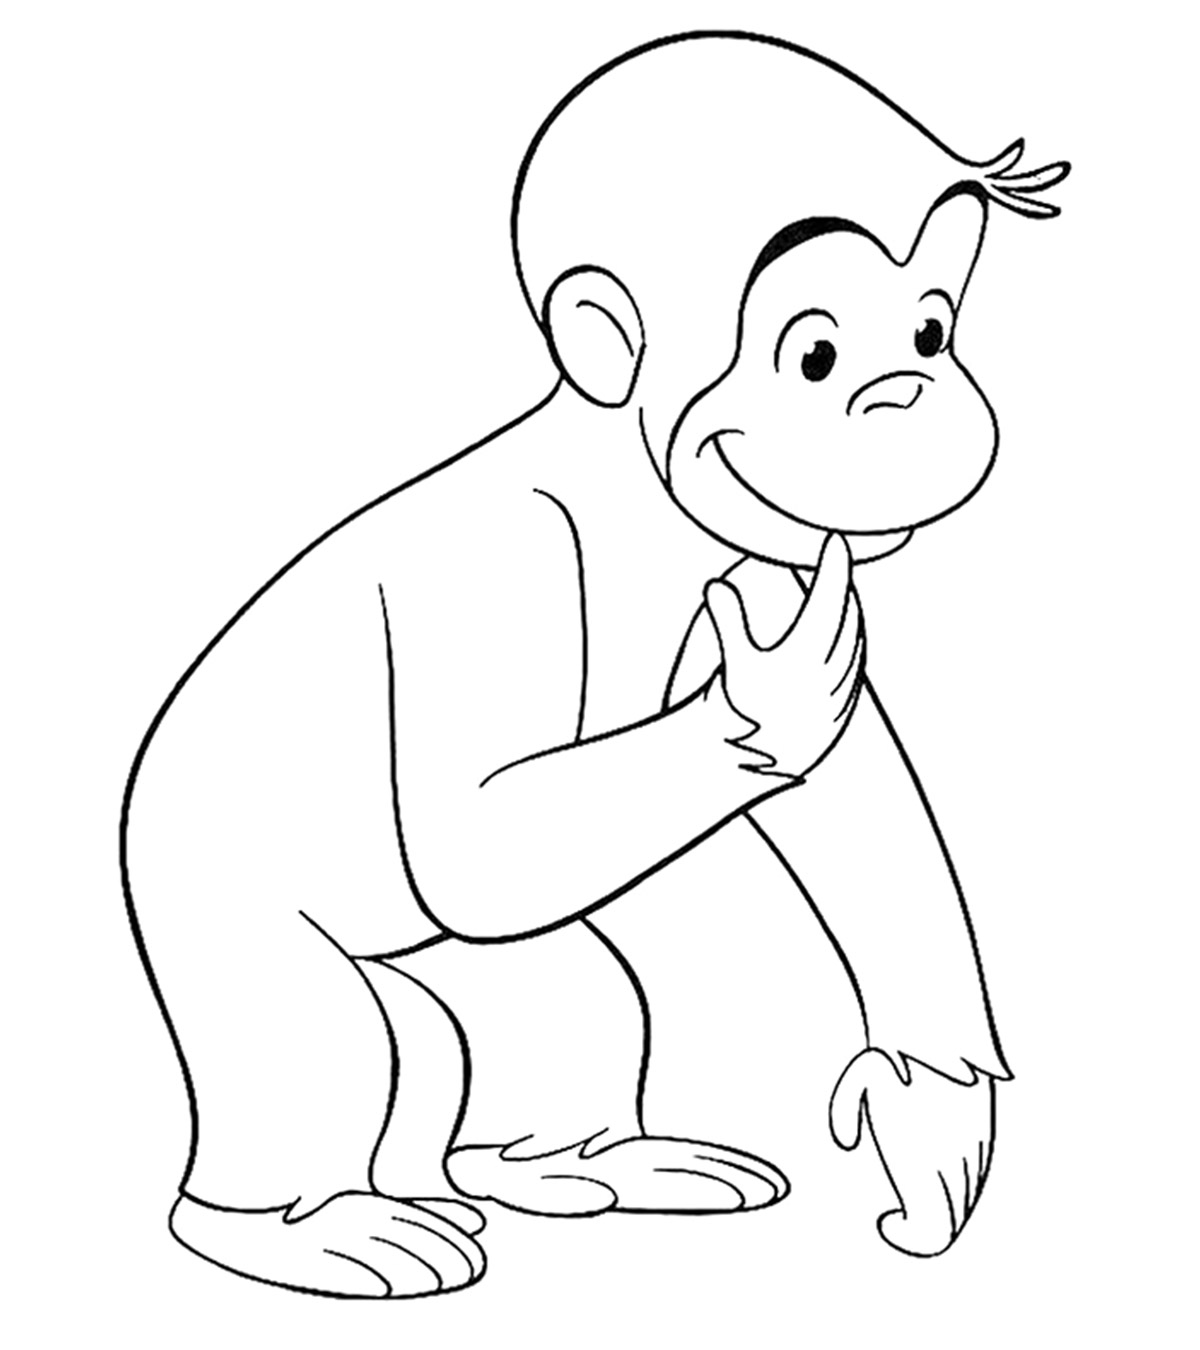 Cartoon Coloring Pages - MomJunction